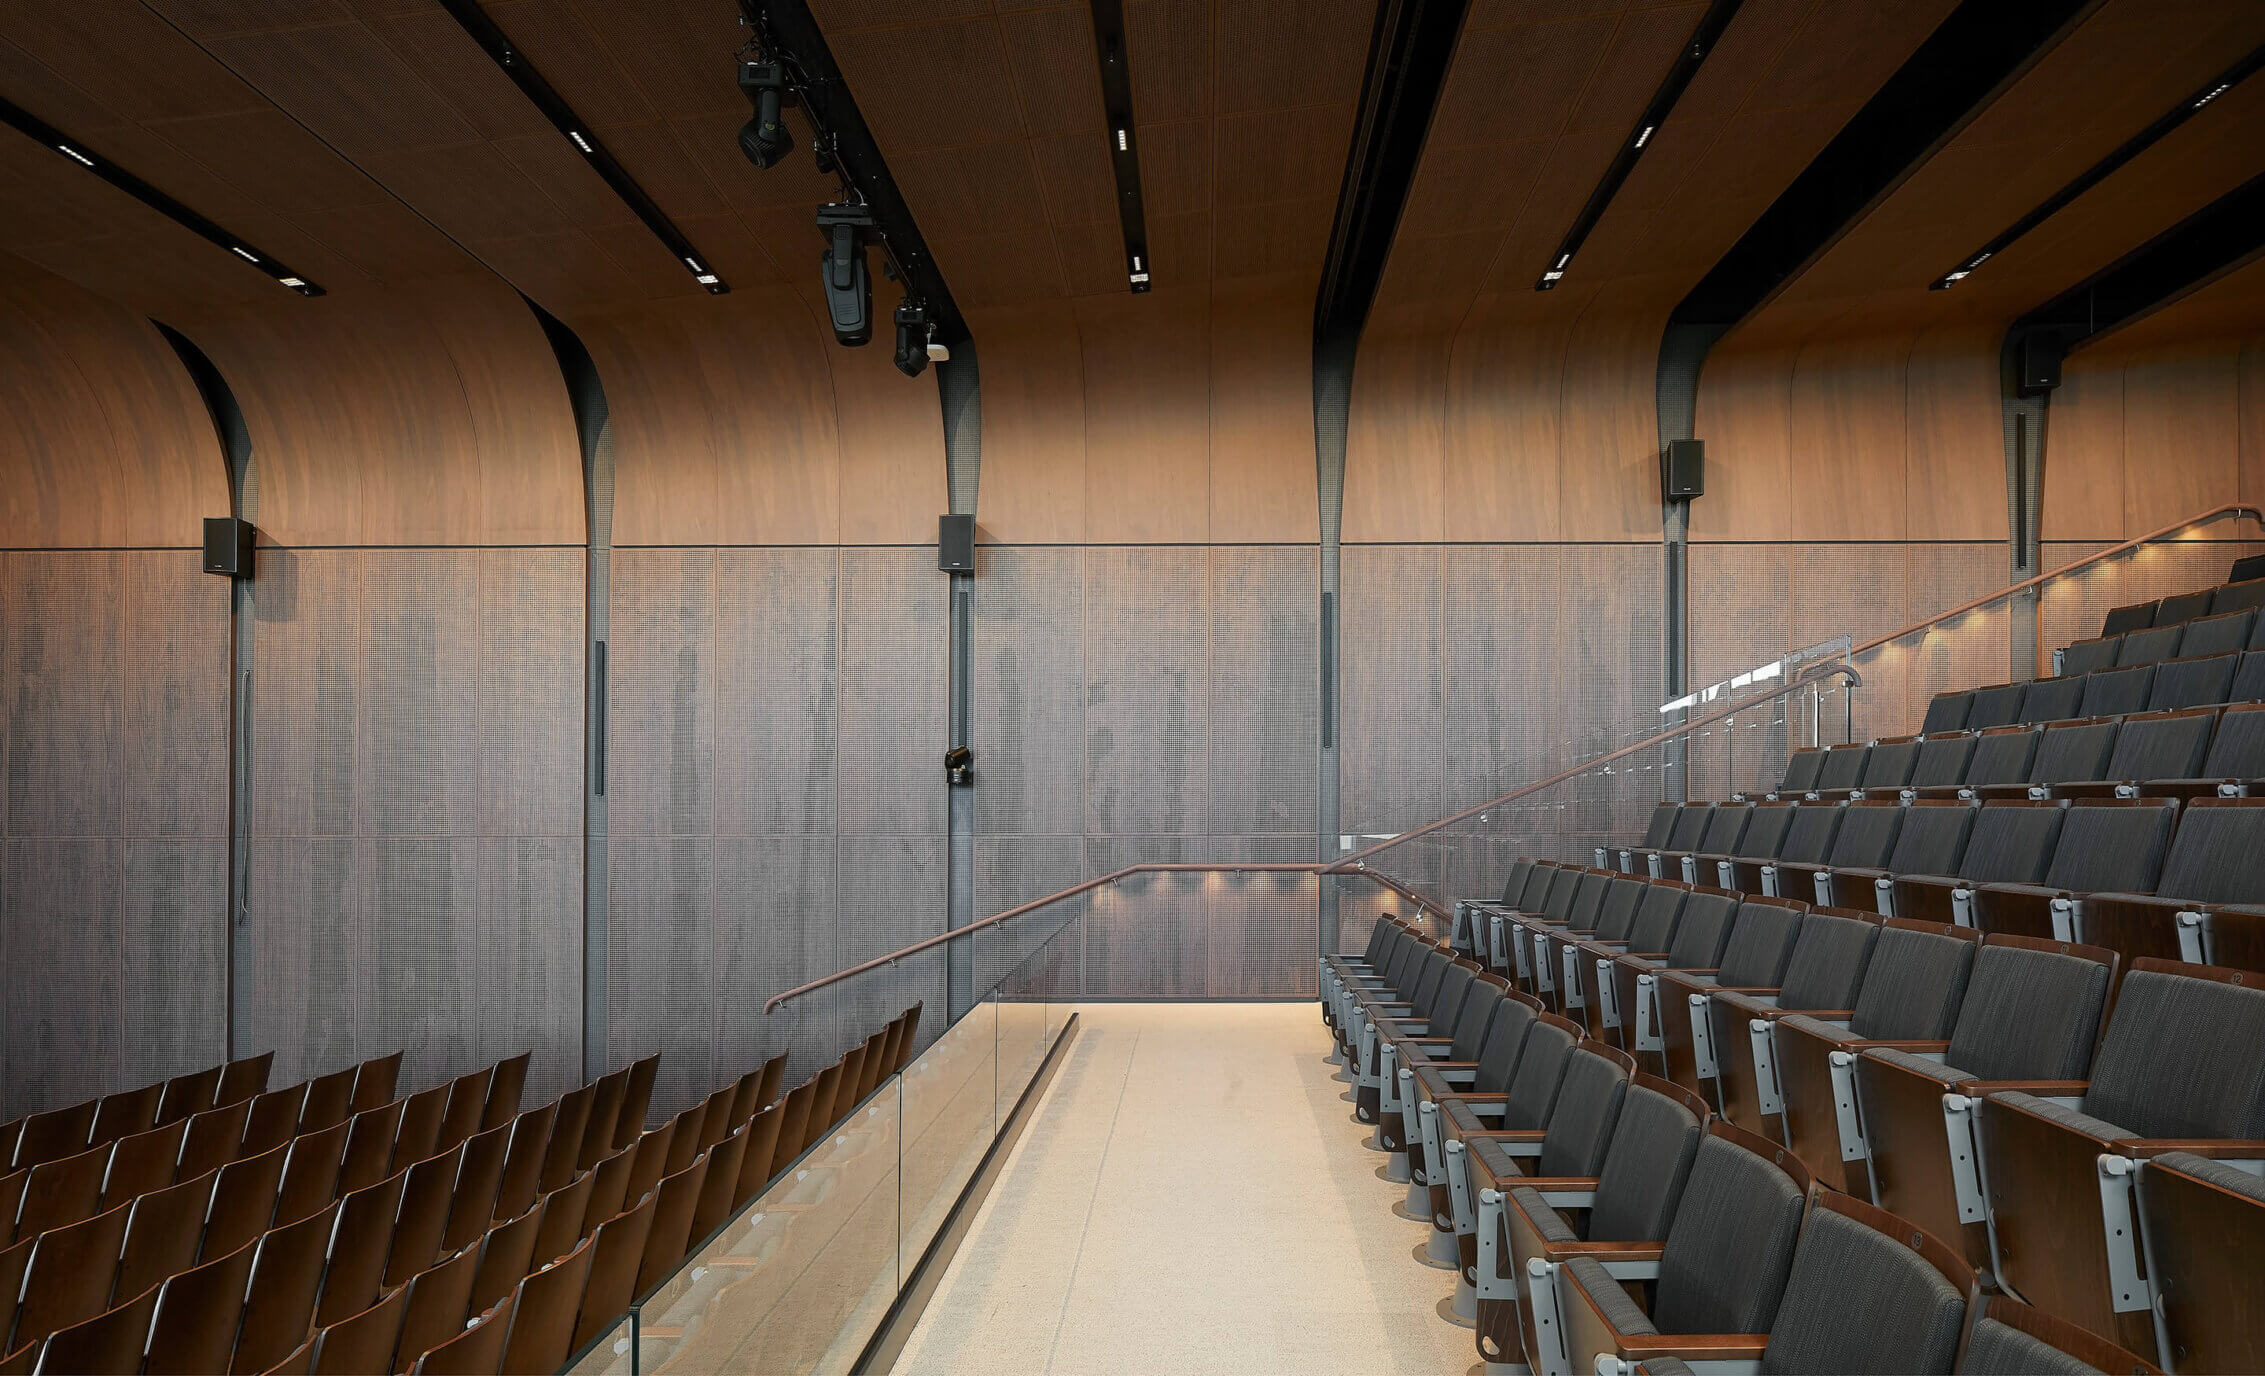 “From a construction perspective, my favorite spaces would be the auditorium and the boardroom.”